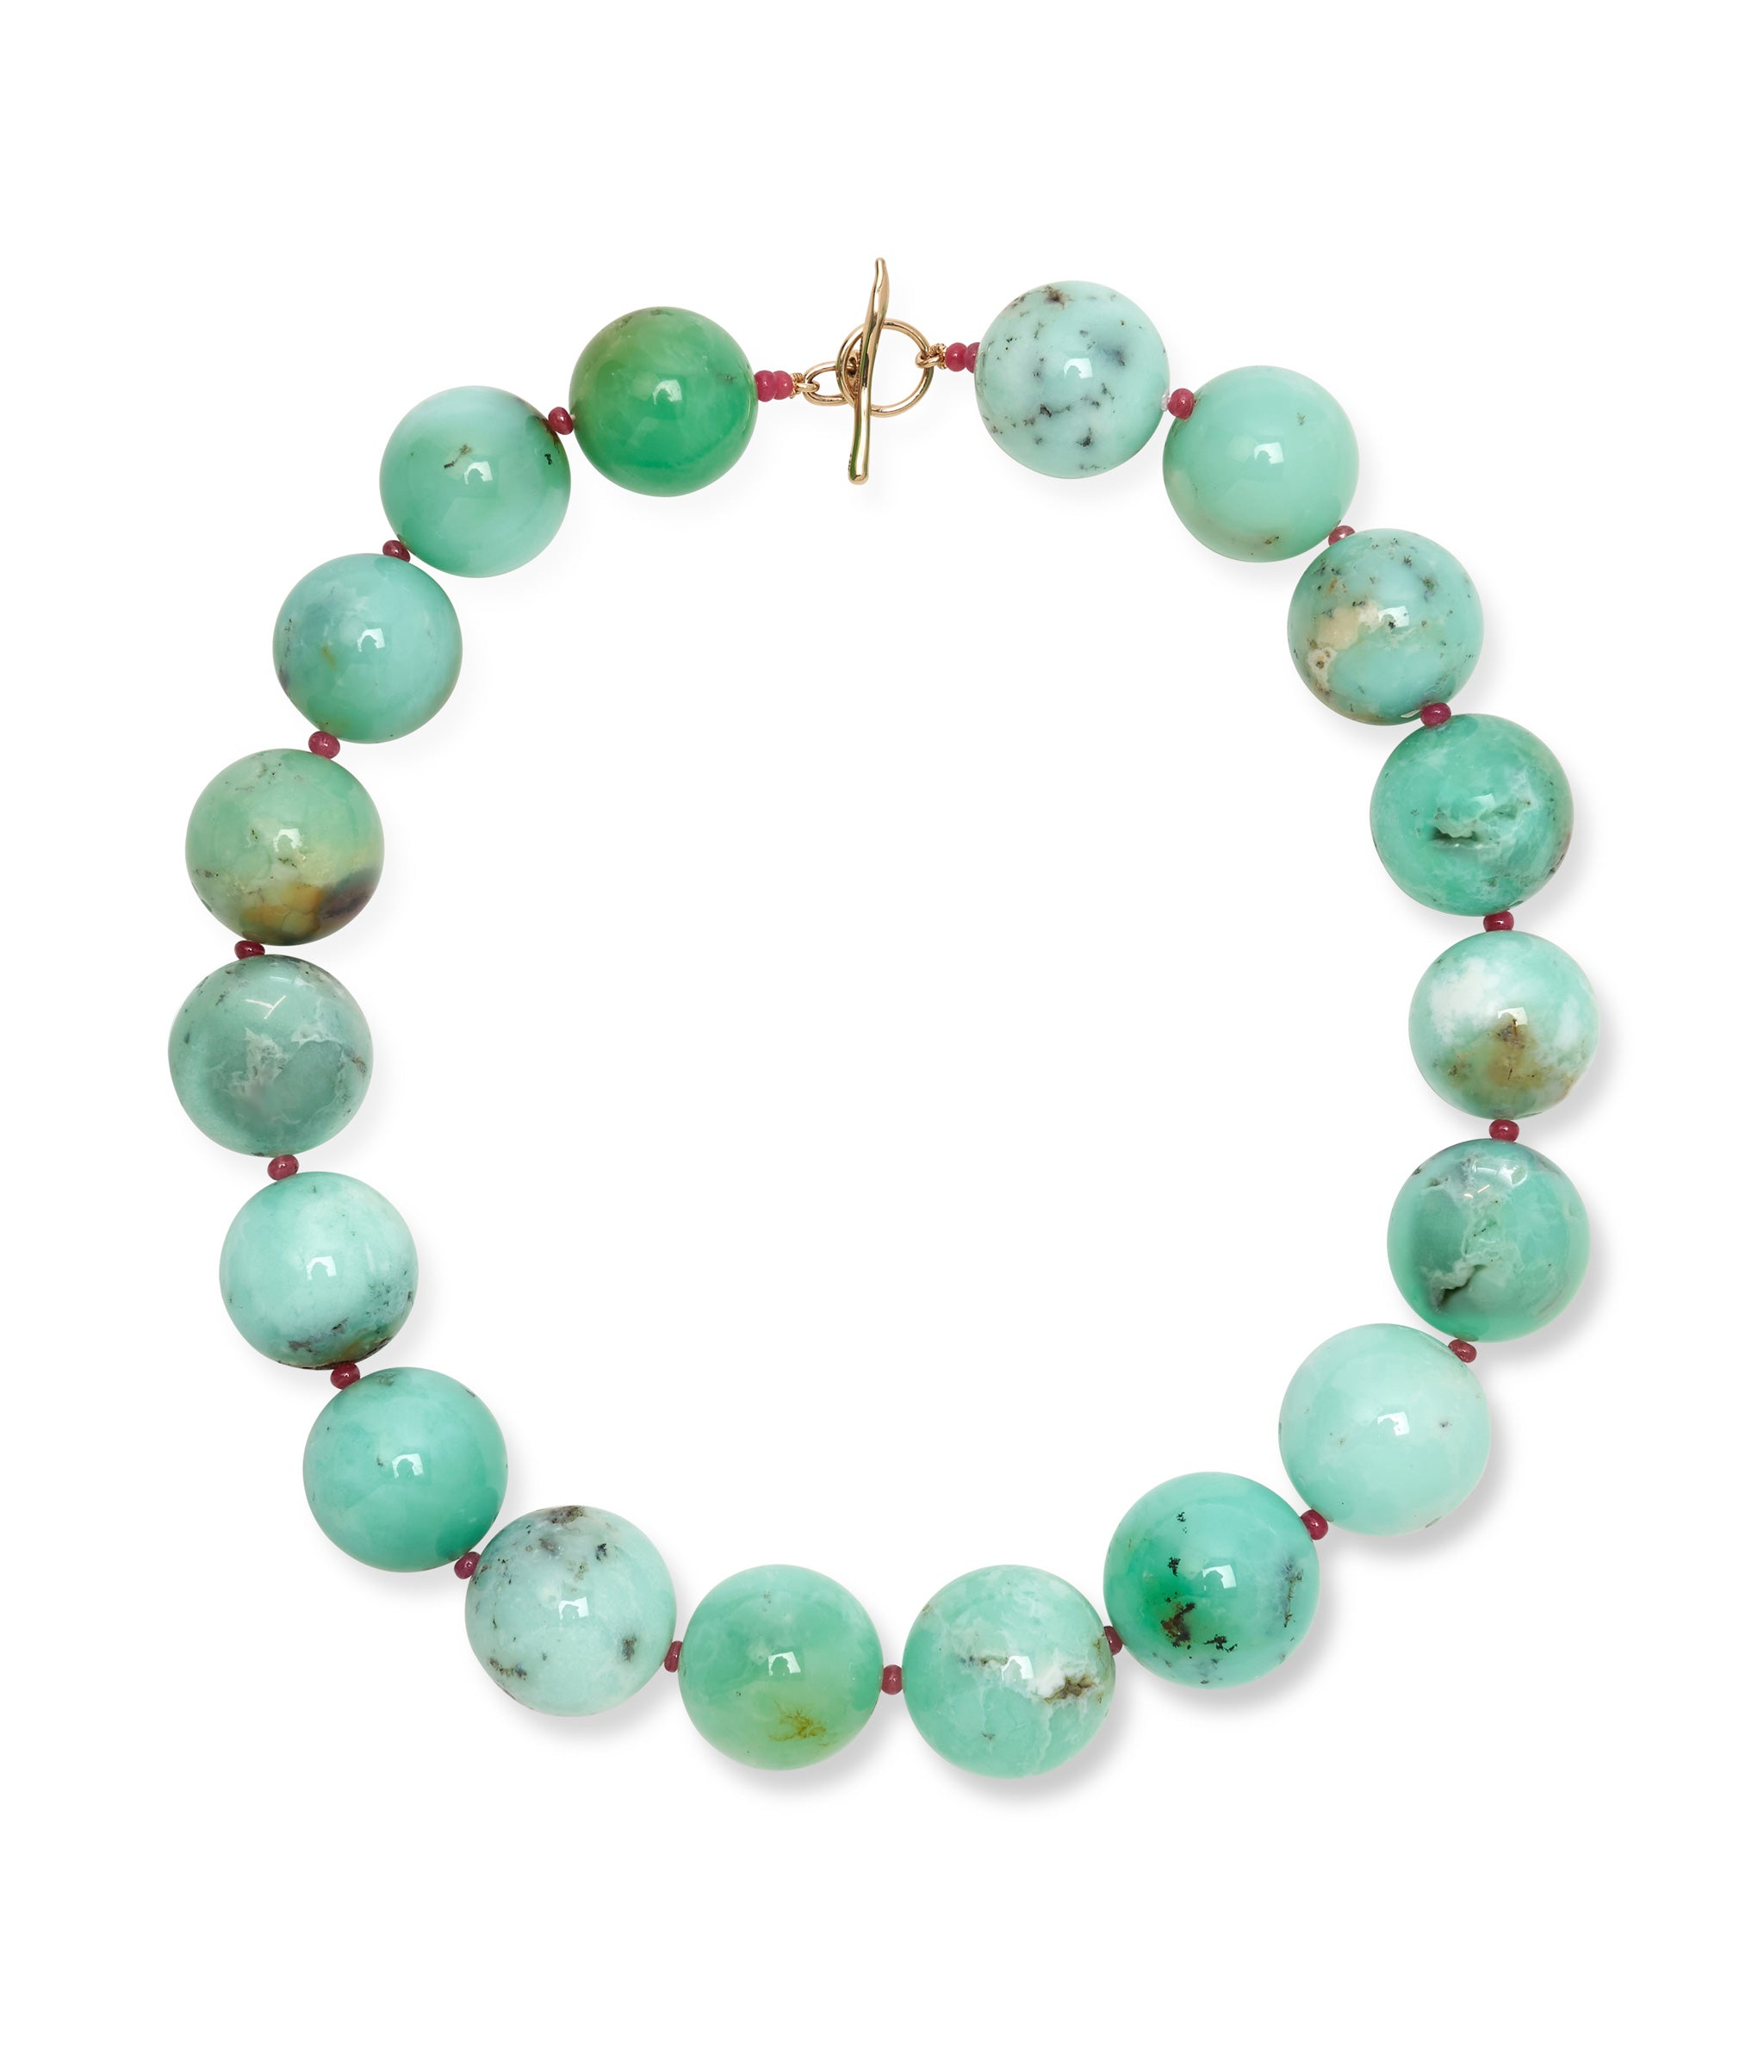 Jumbo Chrysoprase, Ruby & 14k Gold Necklace. Large round blue-green beads with tiny rubies and gold toggle closure.